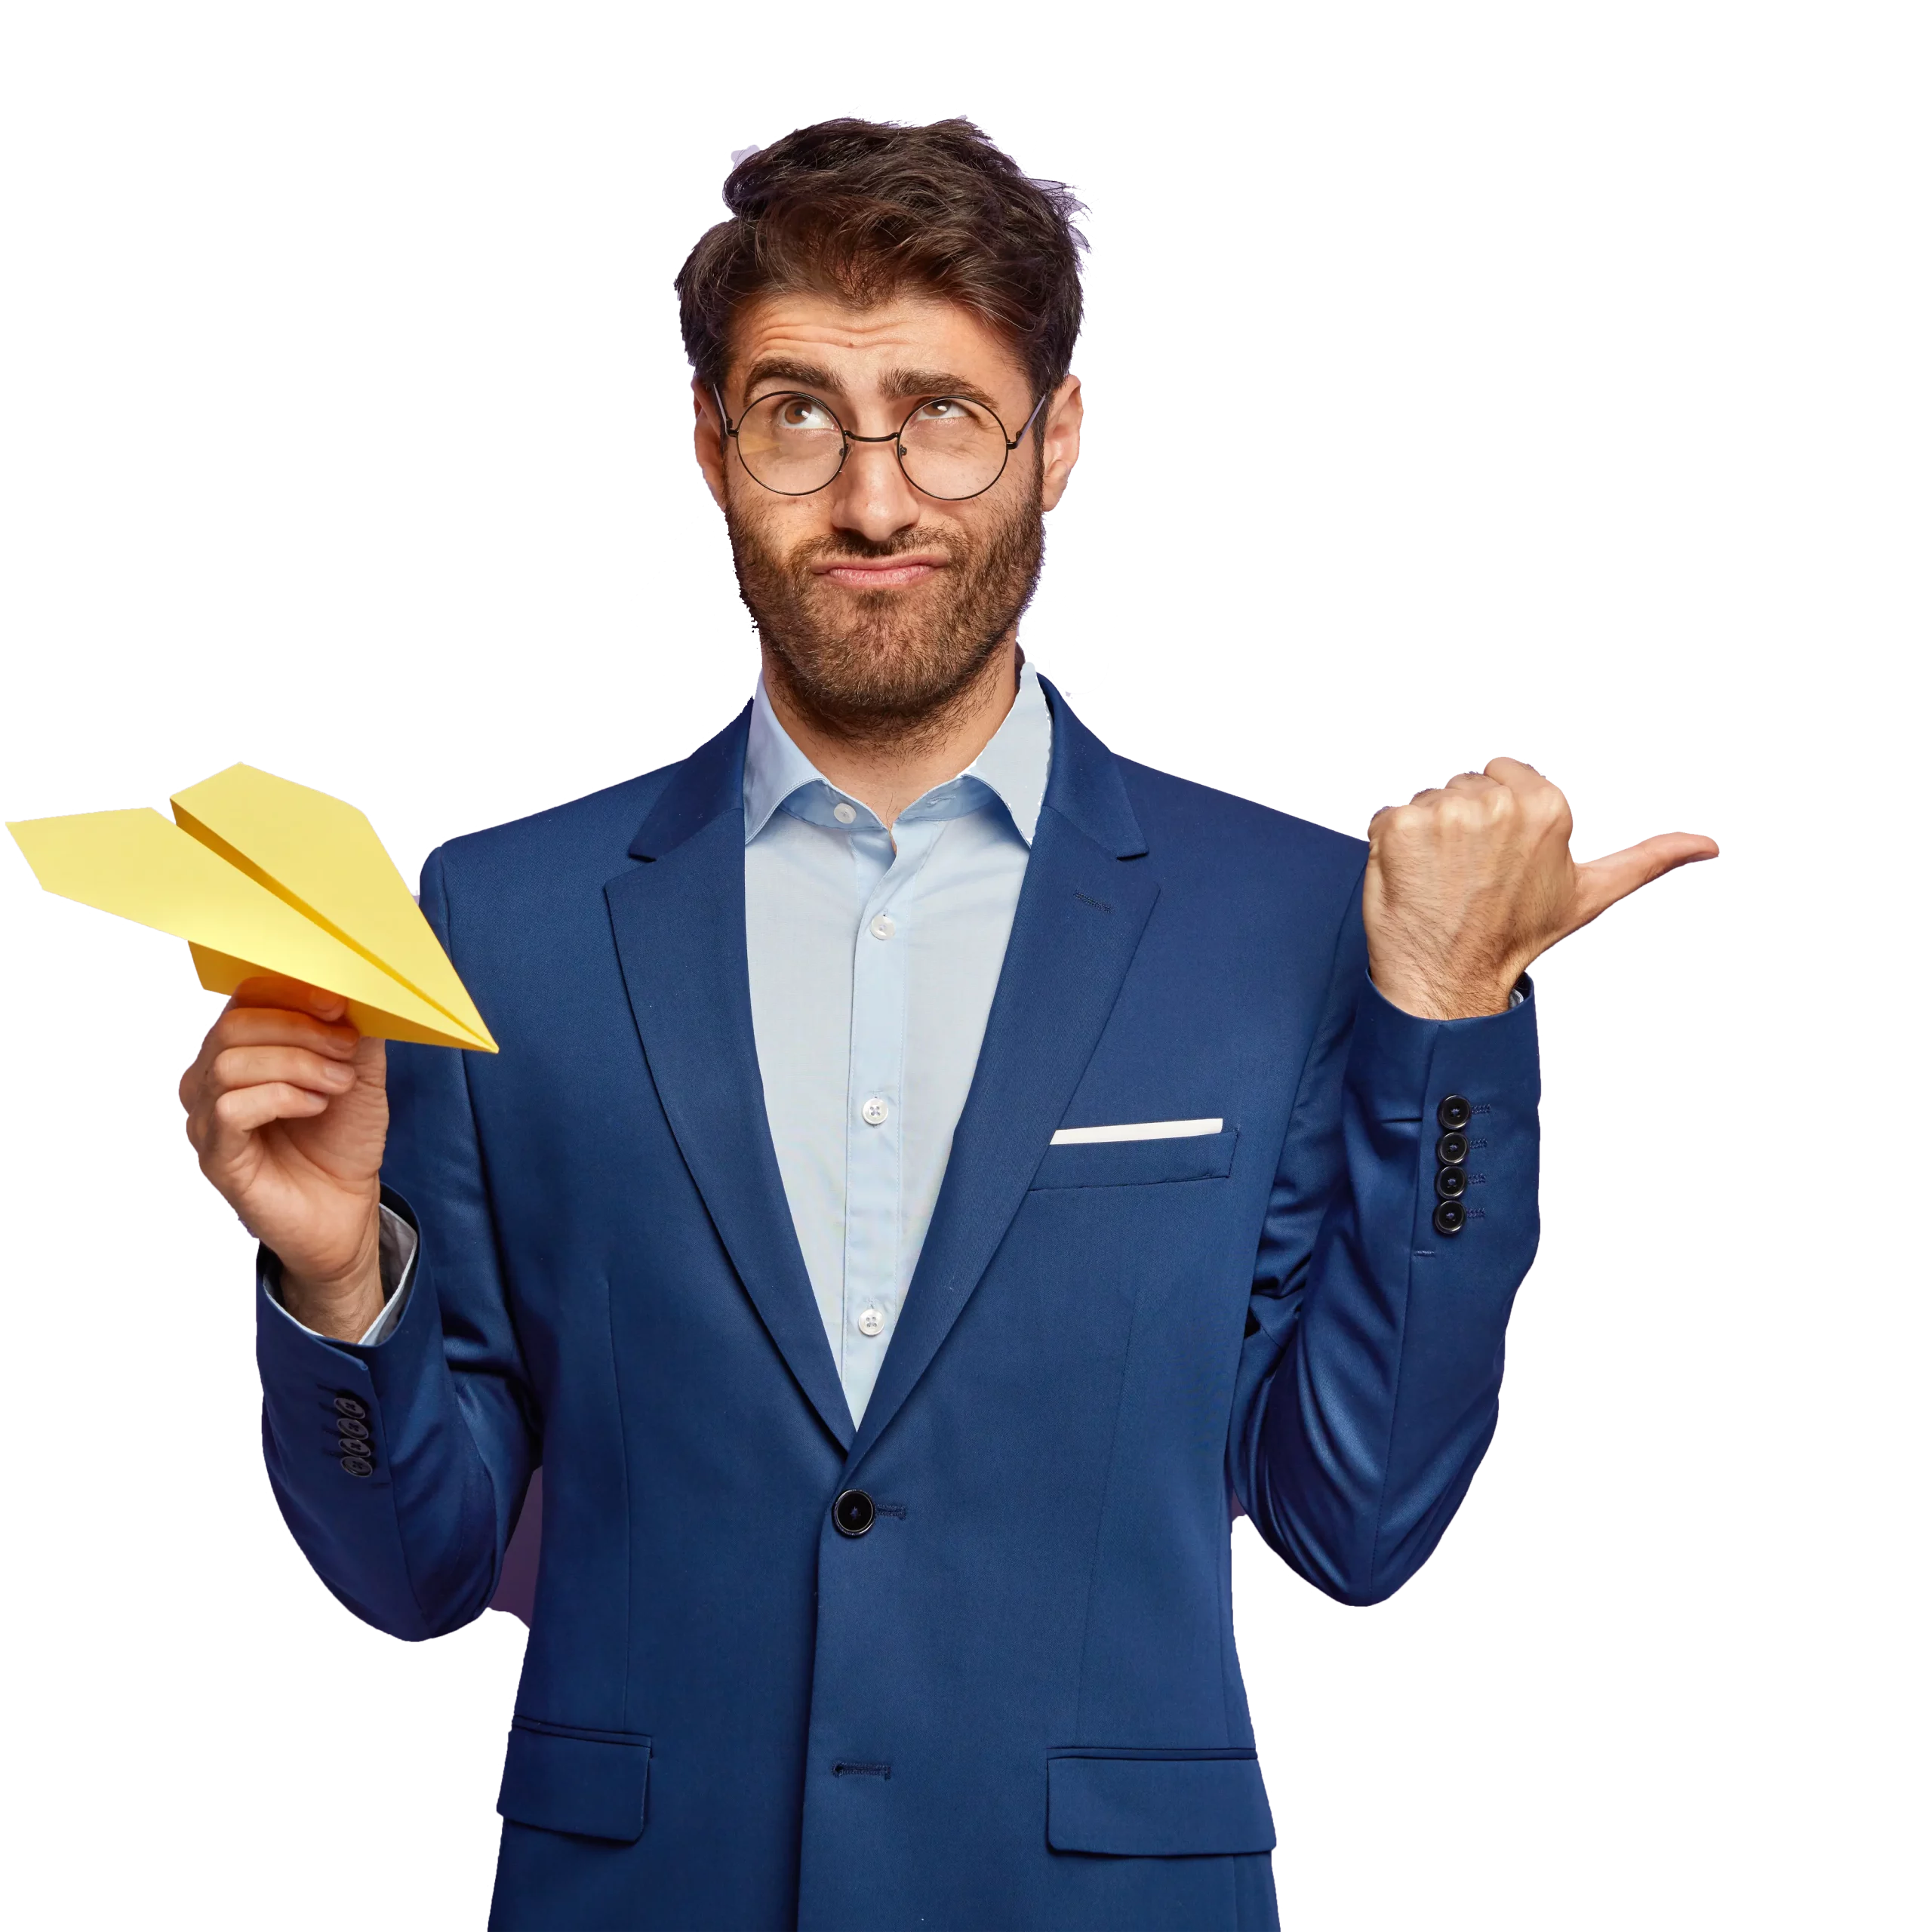 Suited man with confused expression holding a paper aeroplane and pointing with his thumb